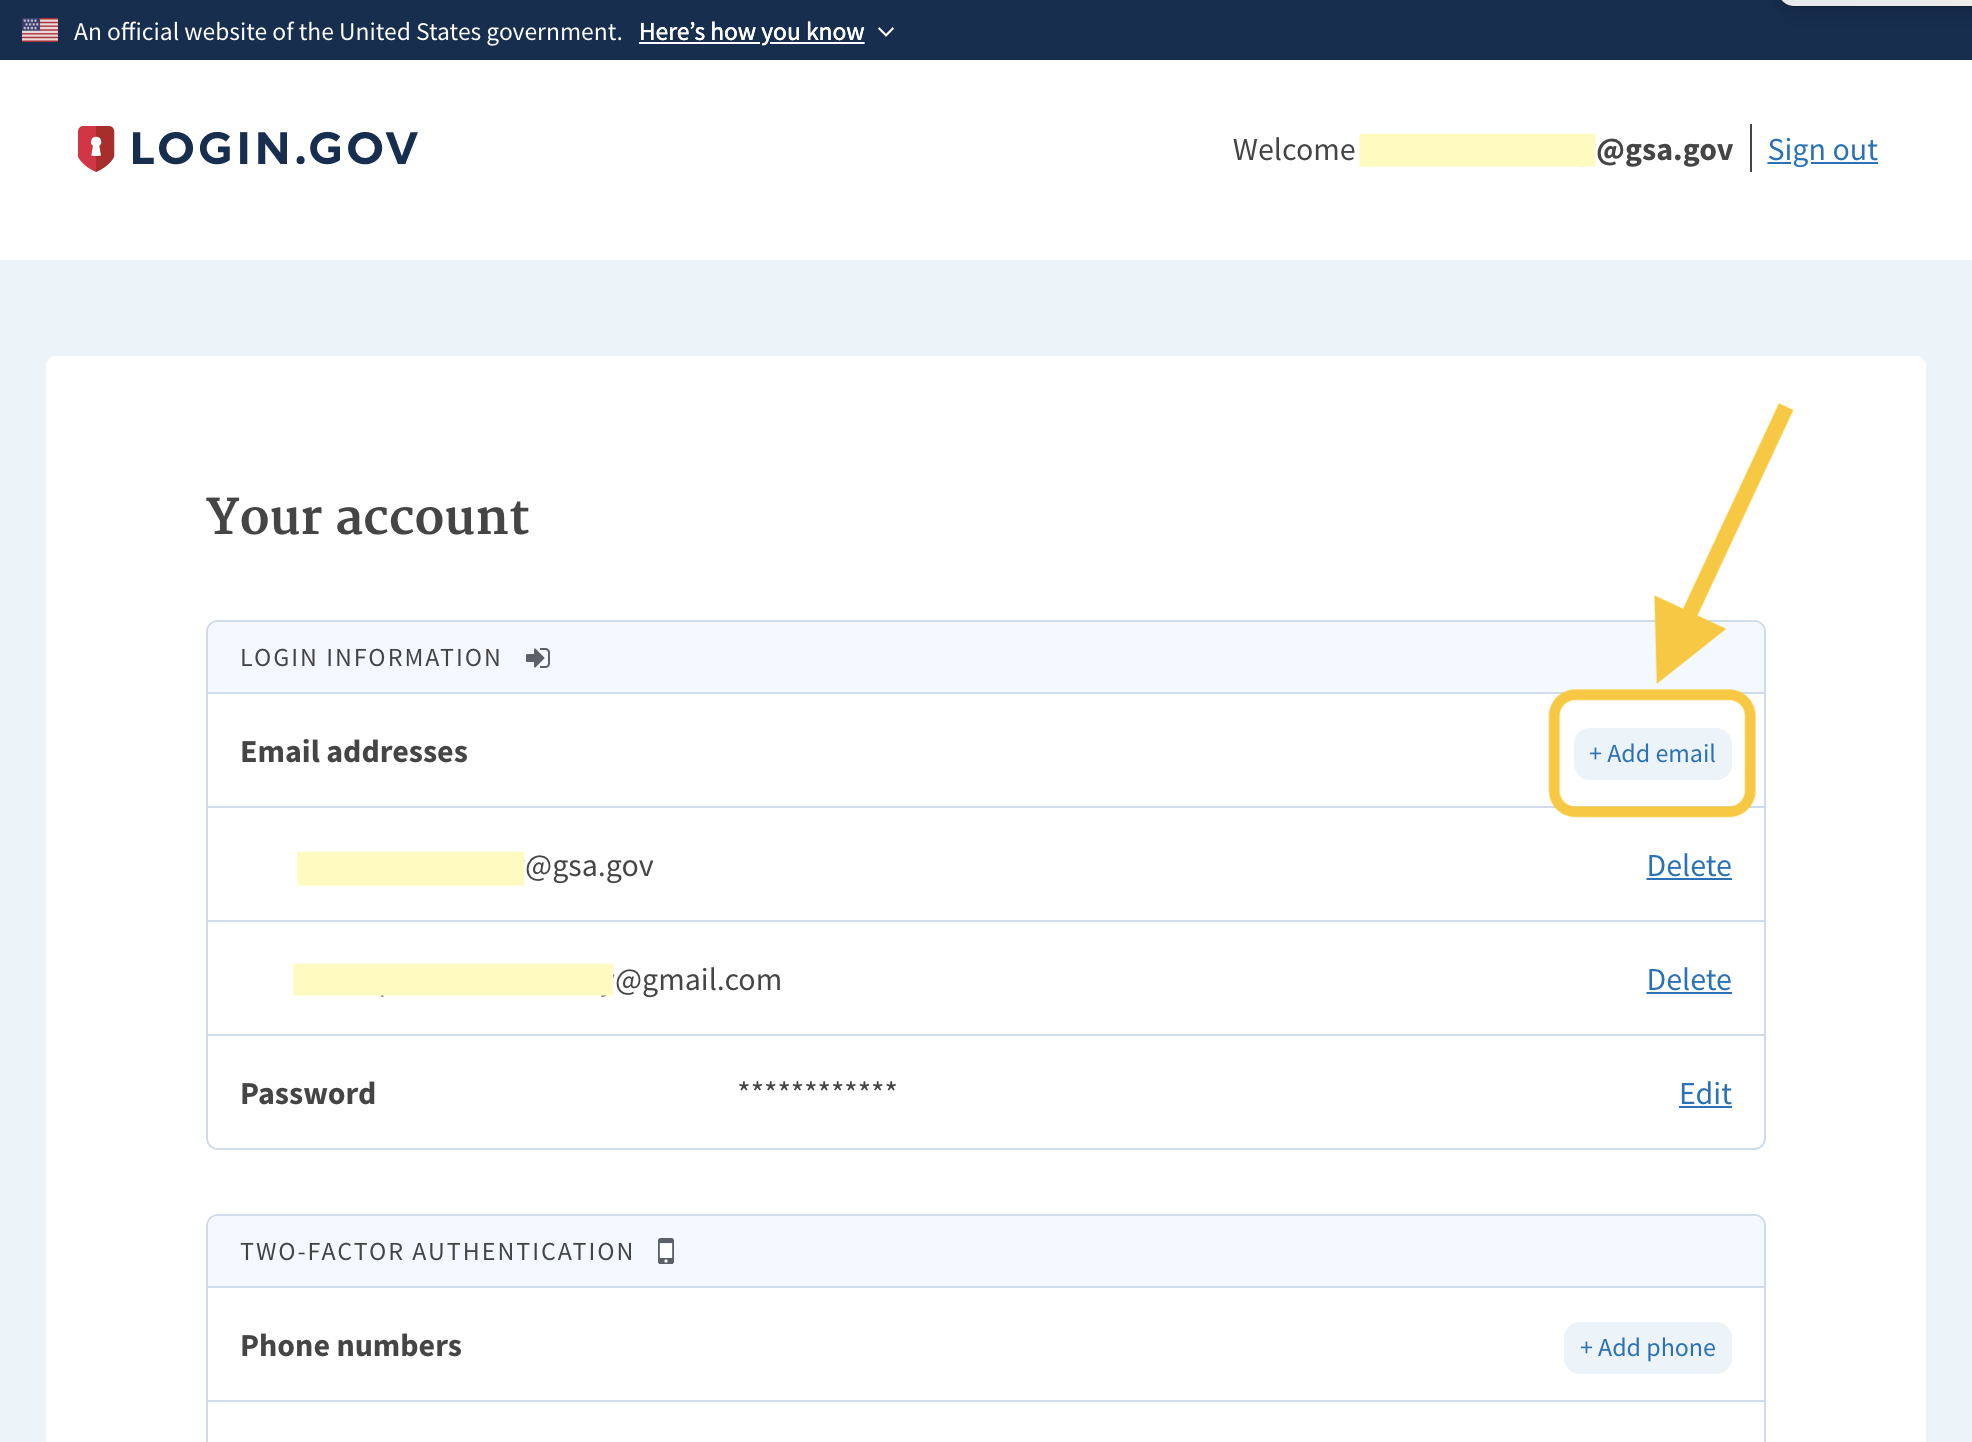 How to Create and Edit Your User Account